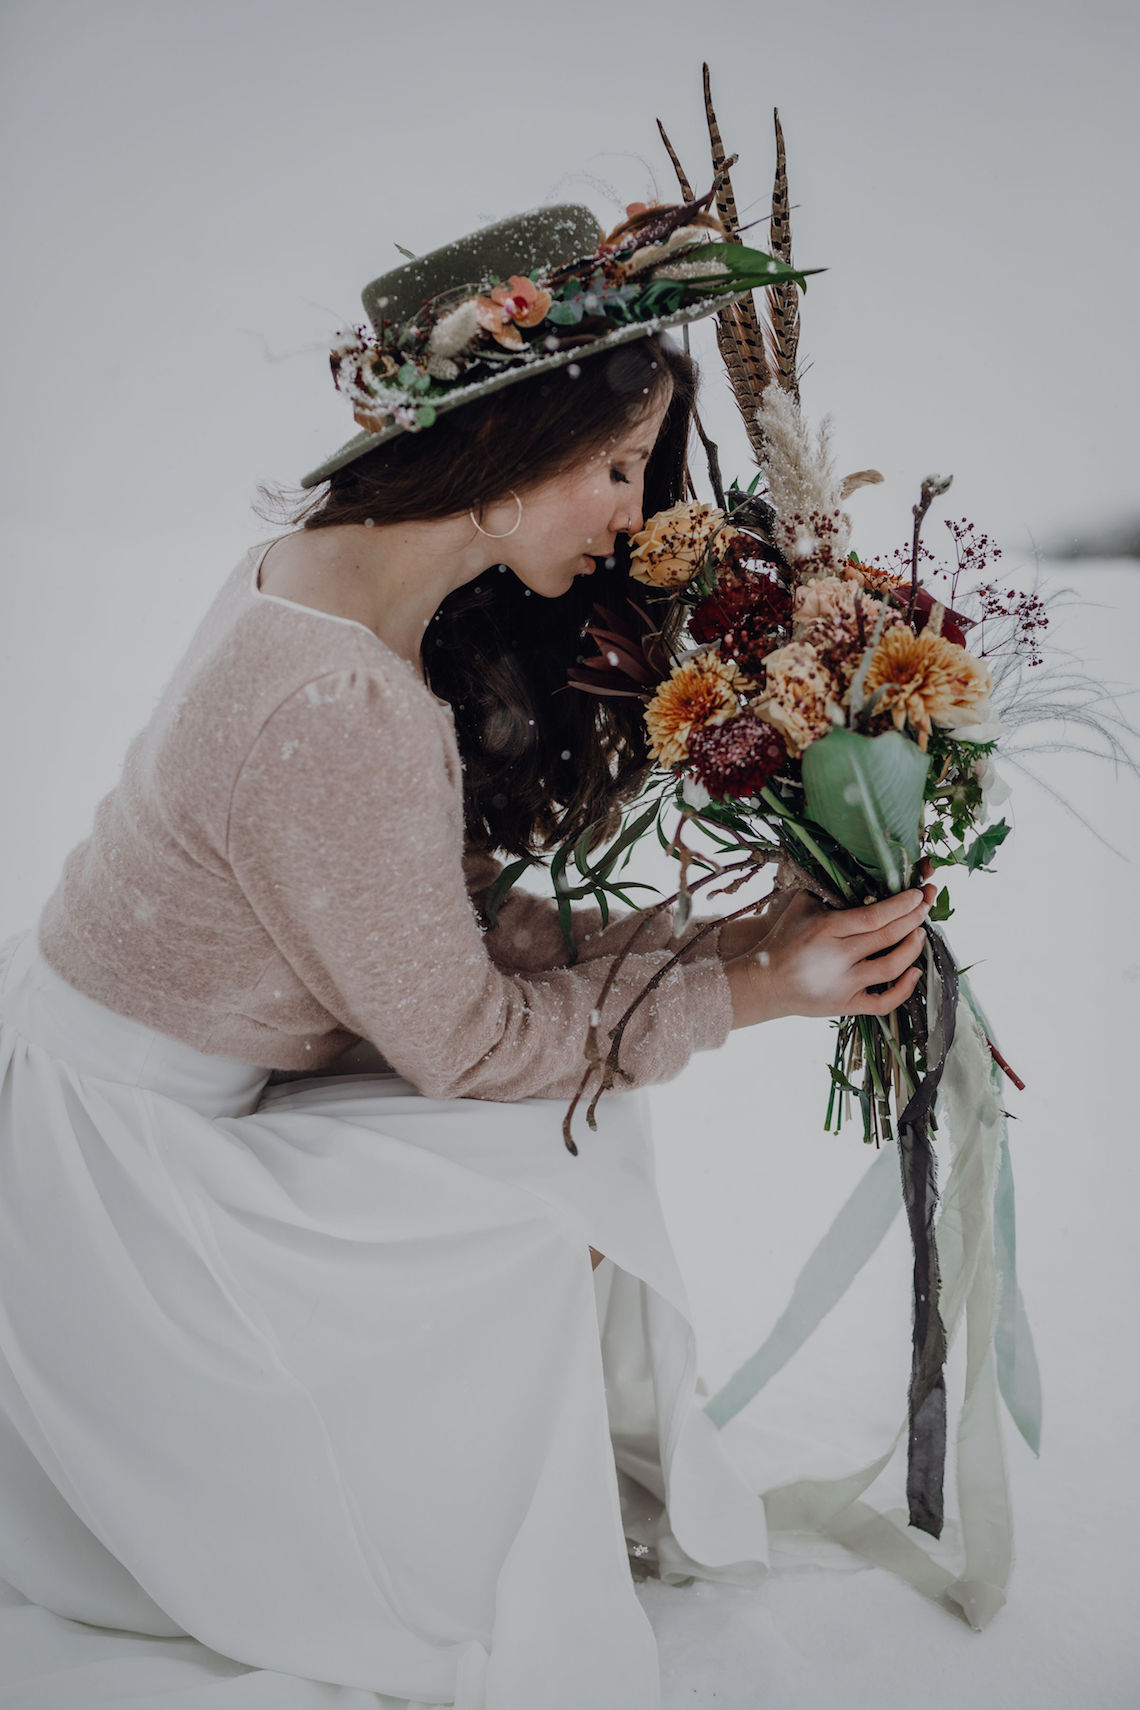 Wild Winter Wedding Inspiration from Iceland – Snowy Scenery and a Bridal Sweater – Melanie Munoz Photography 23